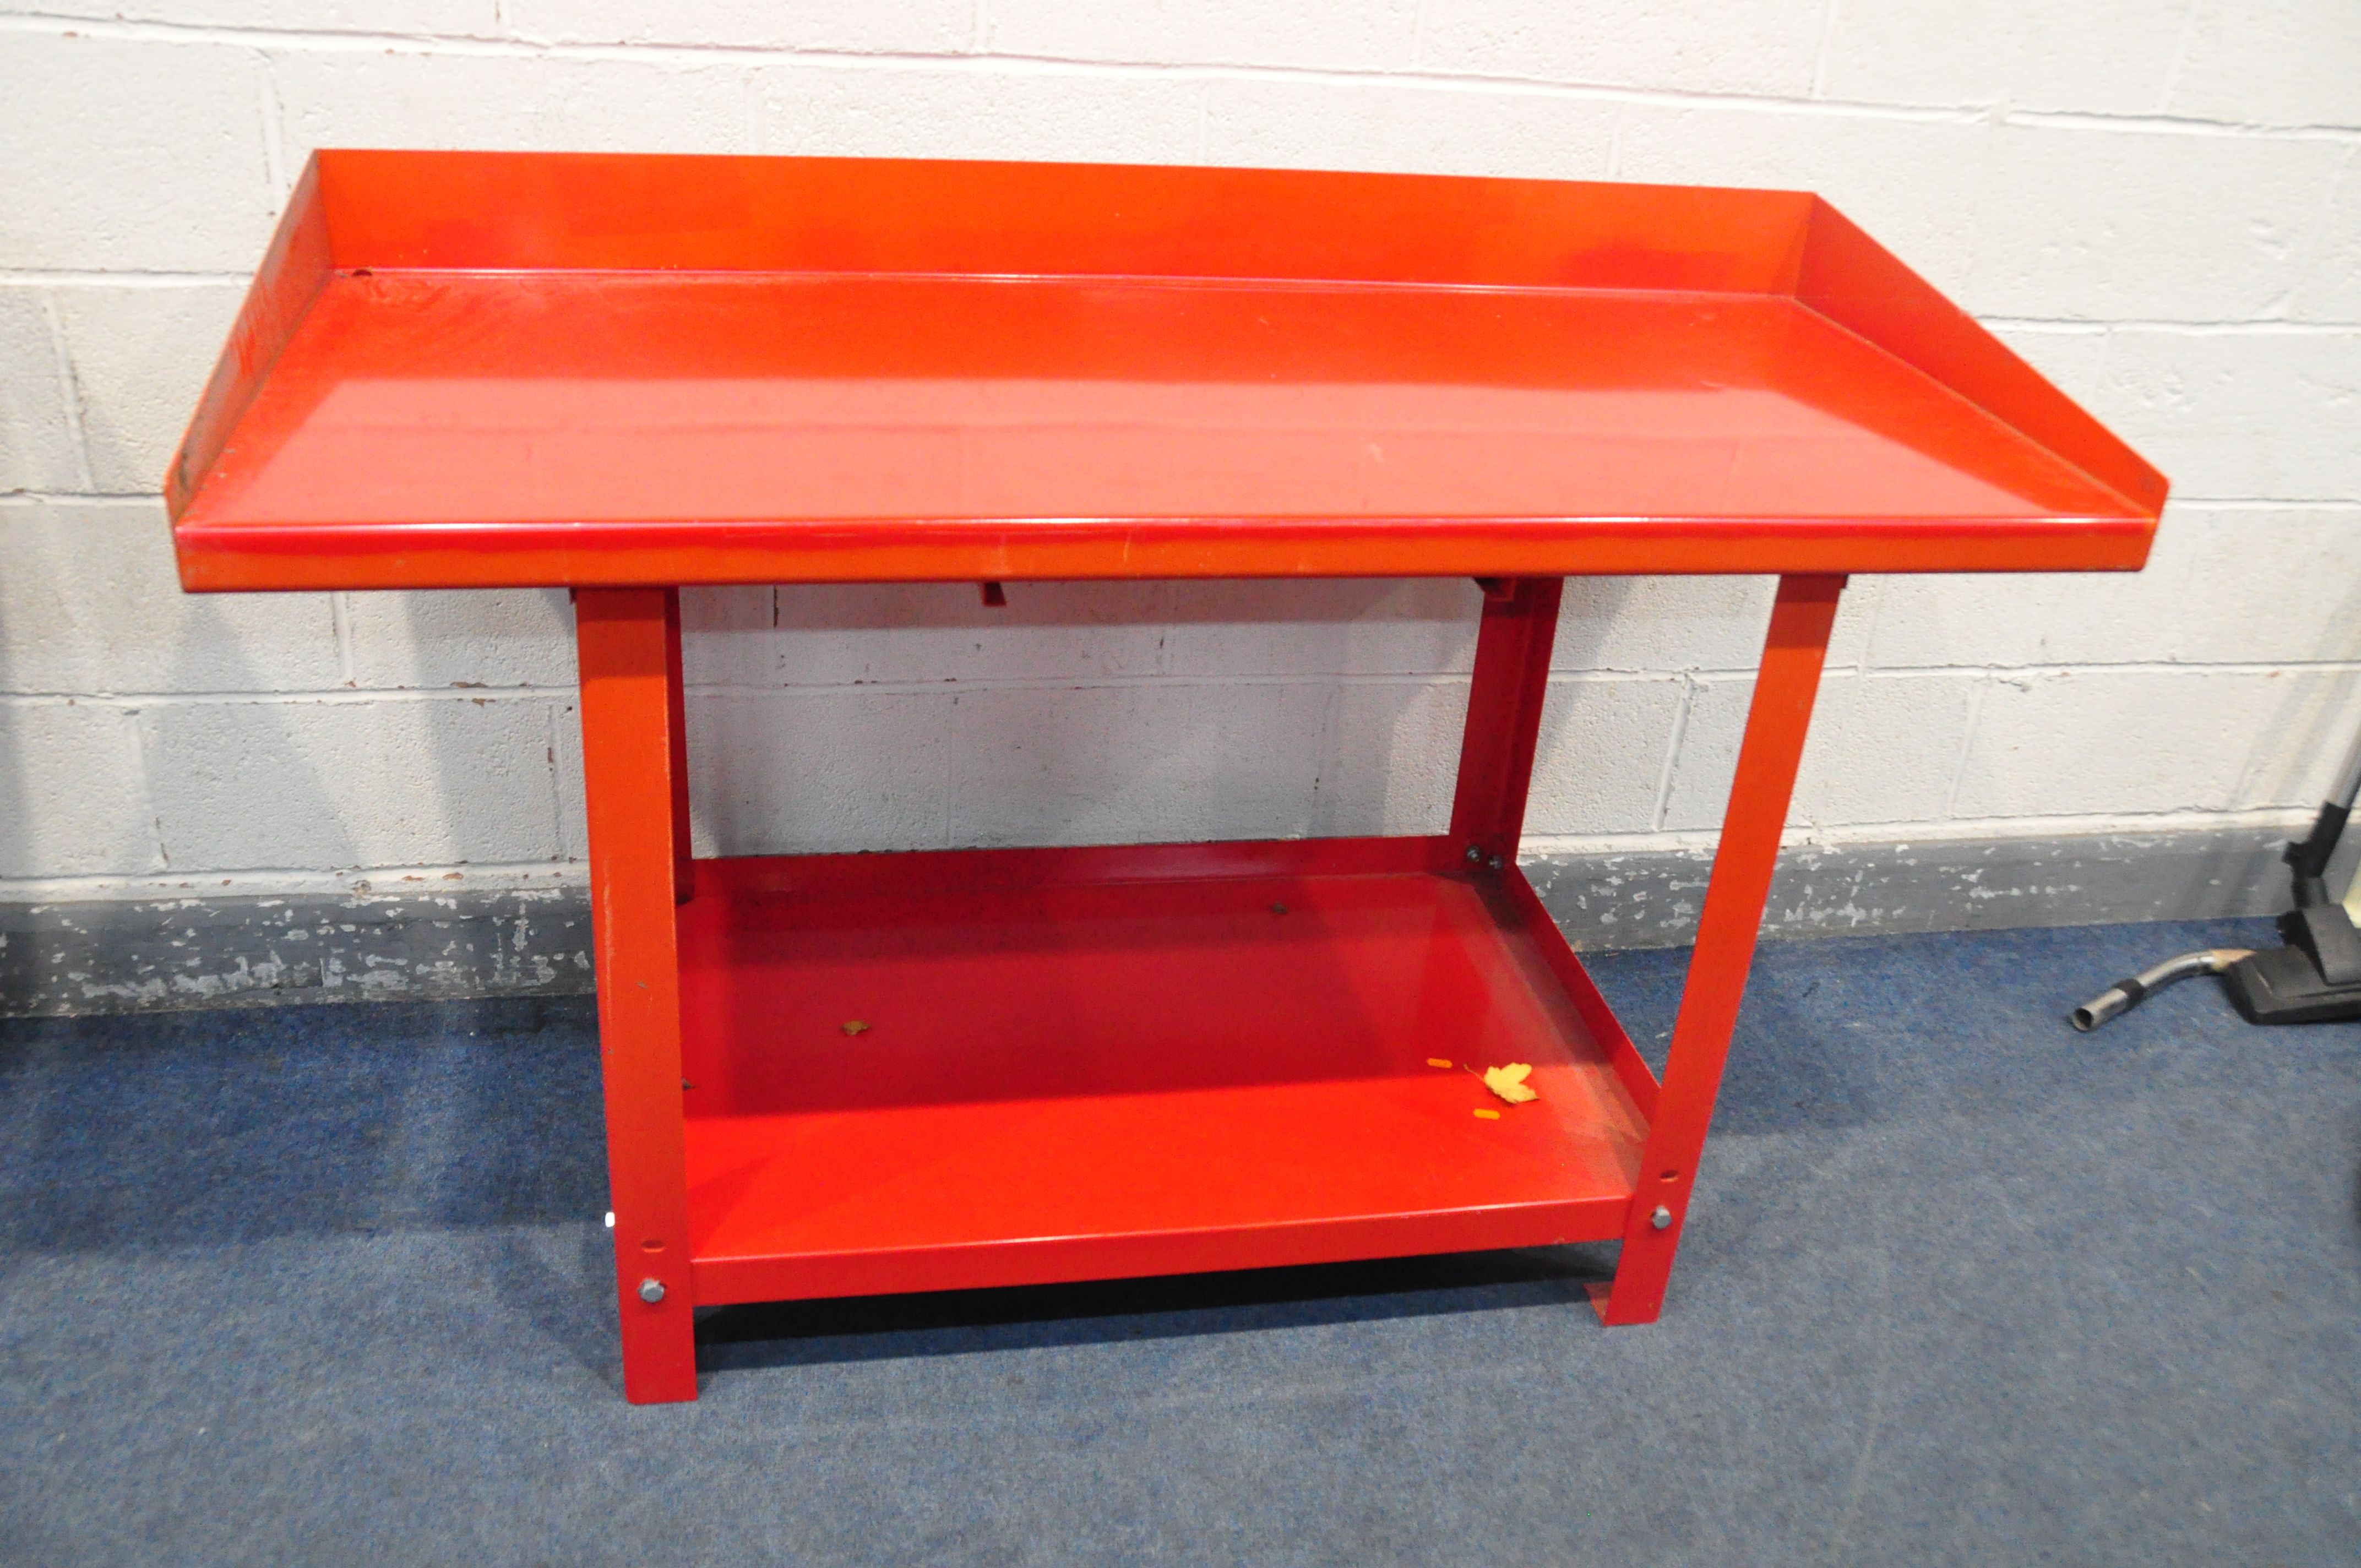 A SEALEY ENGINEERS STEEL WORKTABLE width 151cm depth 65cm height 87cm to working surface with a